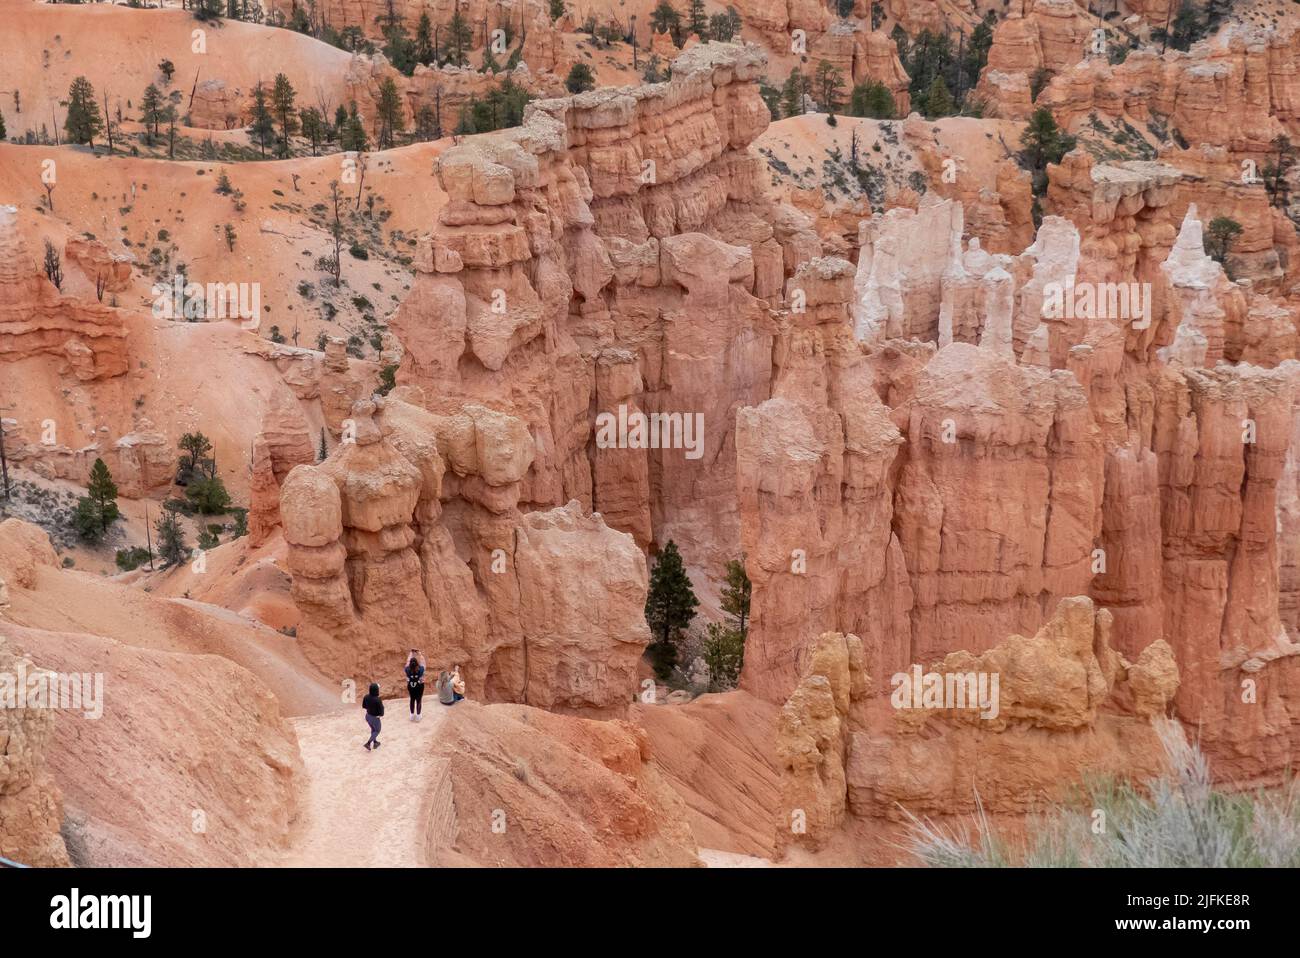 Bryce Canyon NP in Utah: the canyon from the Rim Trail near Sunset Point. Stock Photo